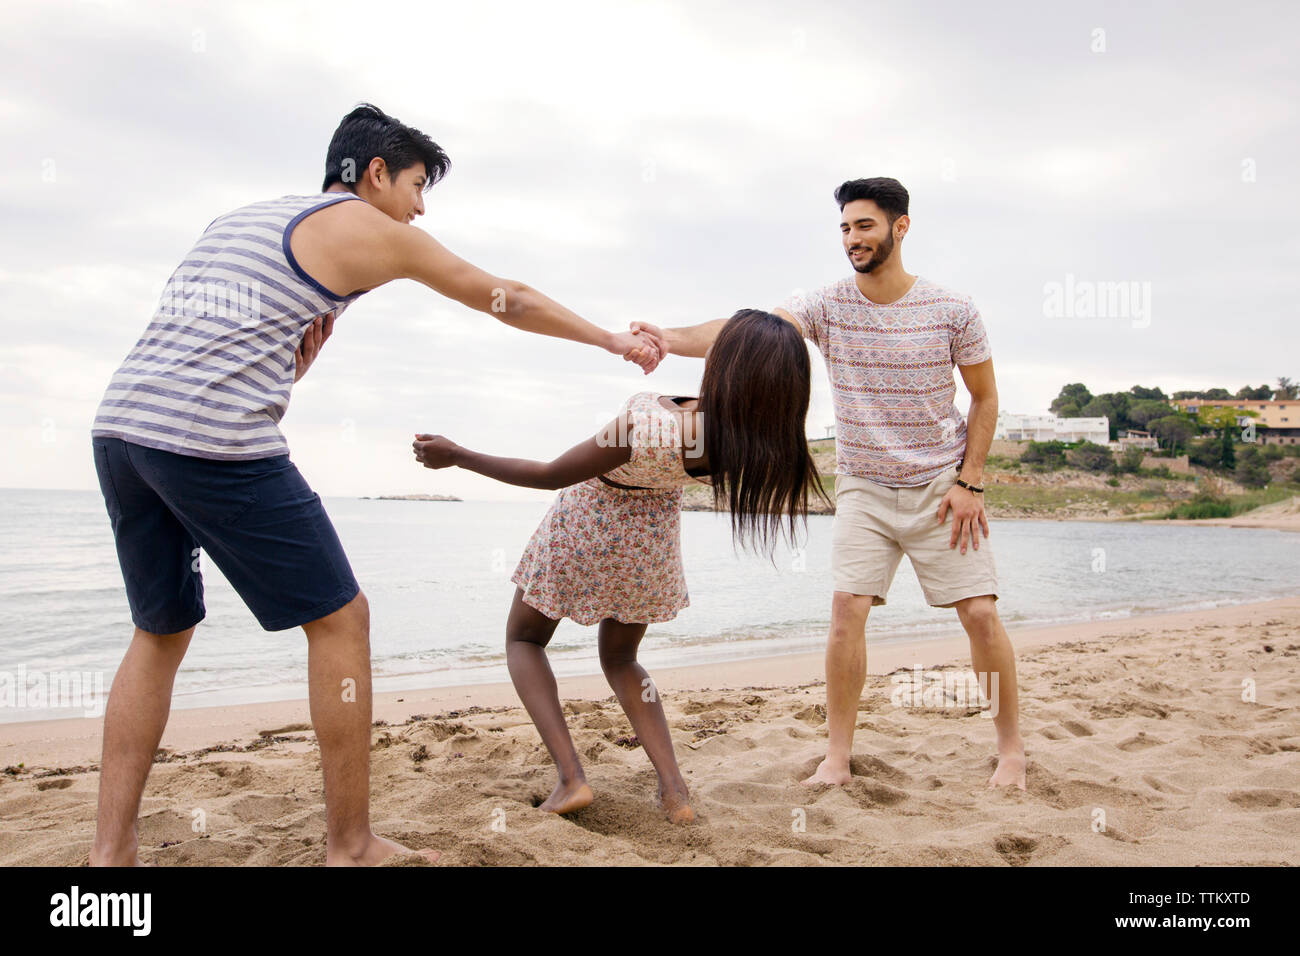 Woman passing under men's arms while playing on beach Stock Photo